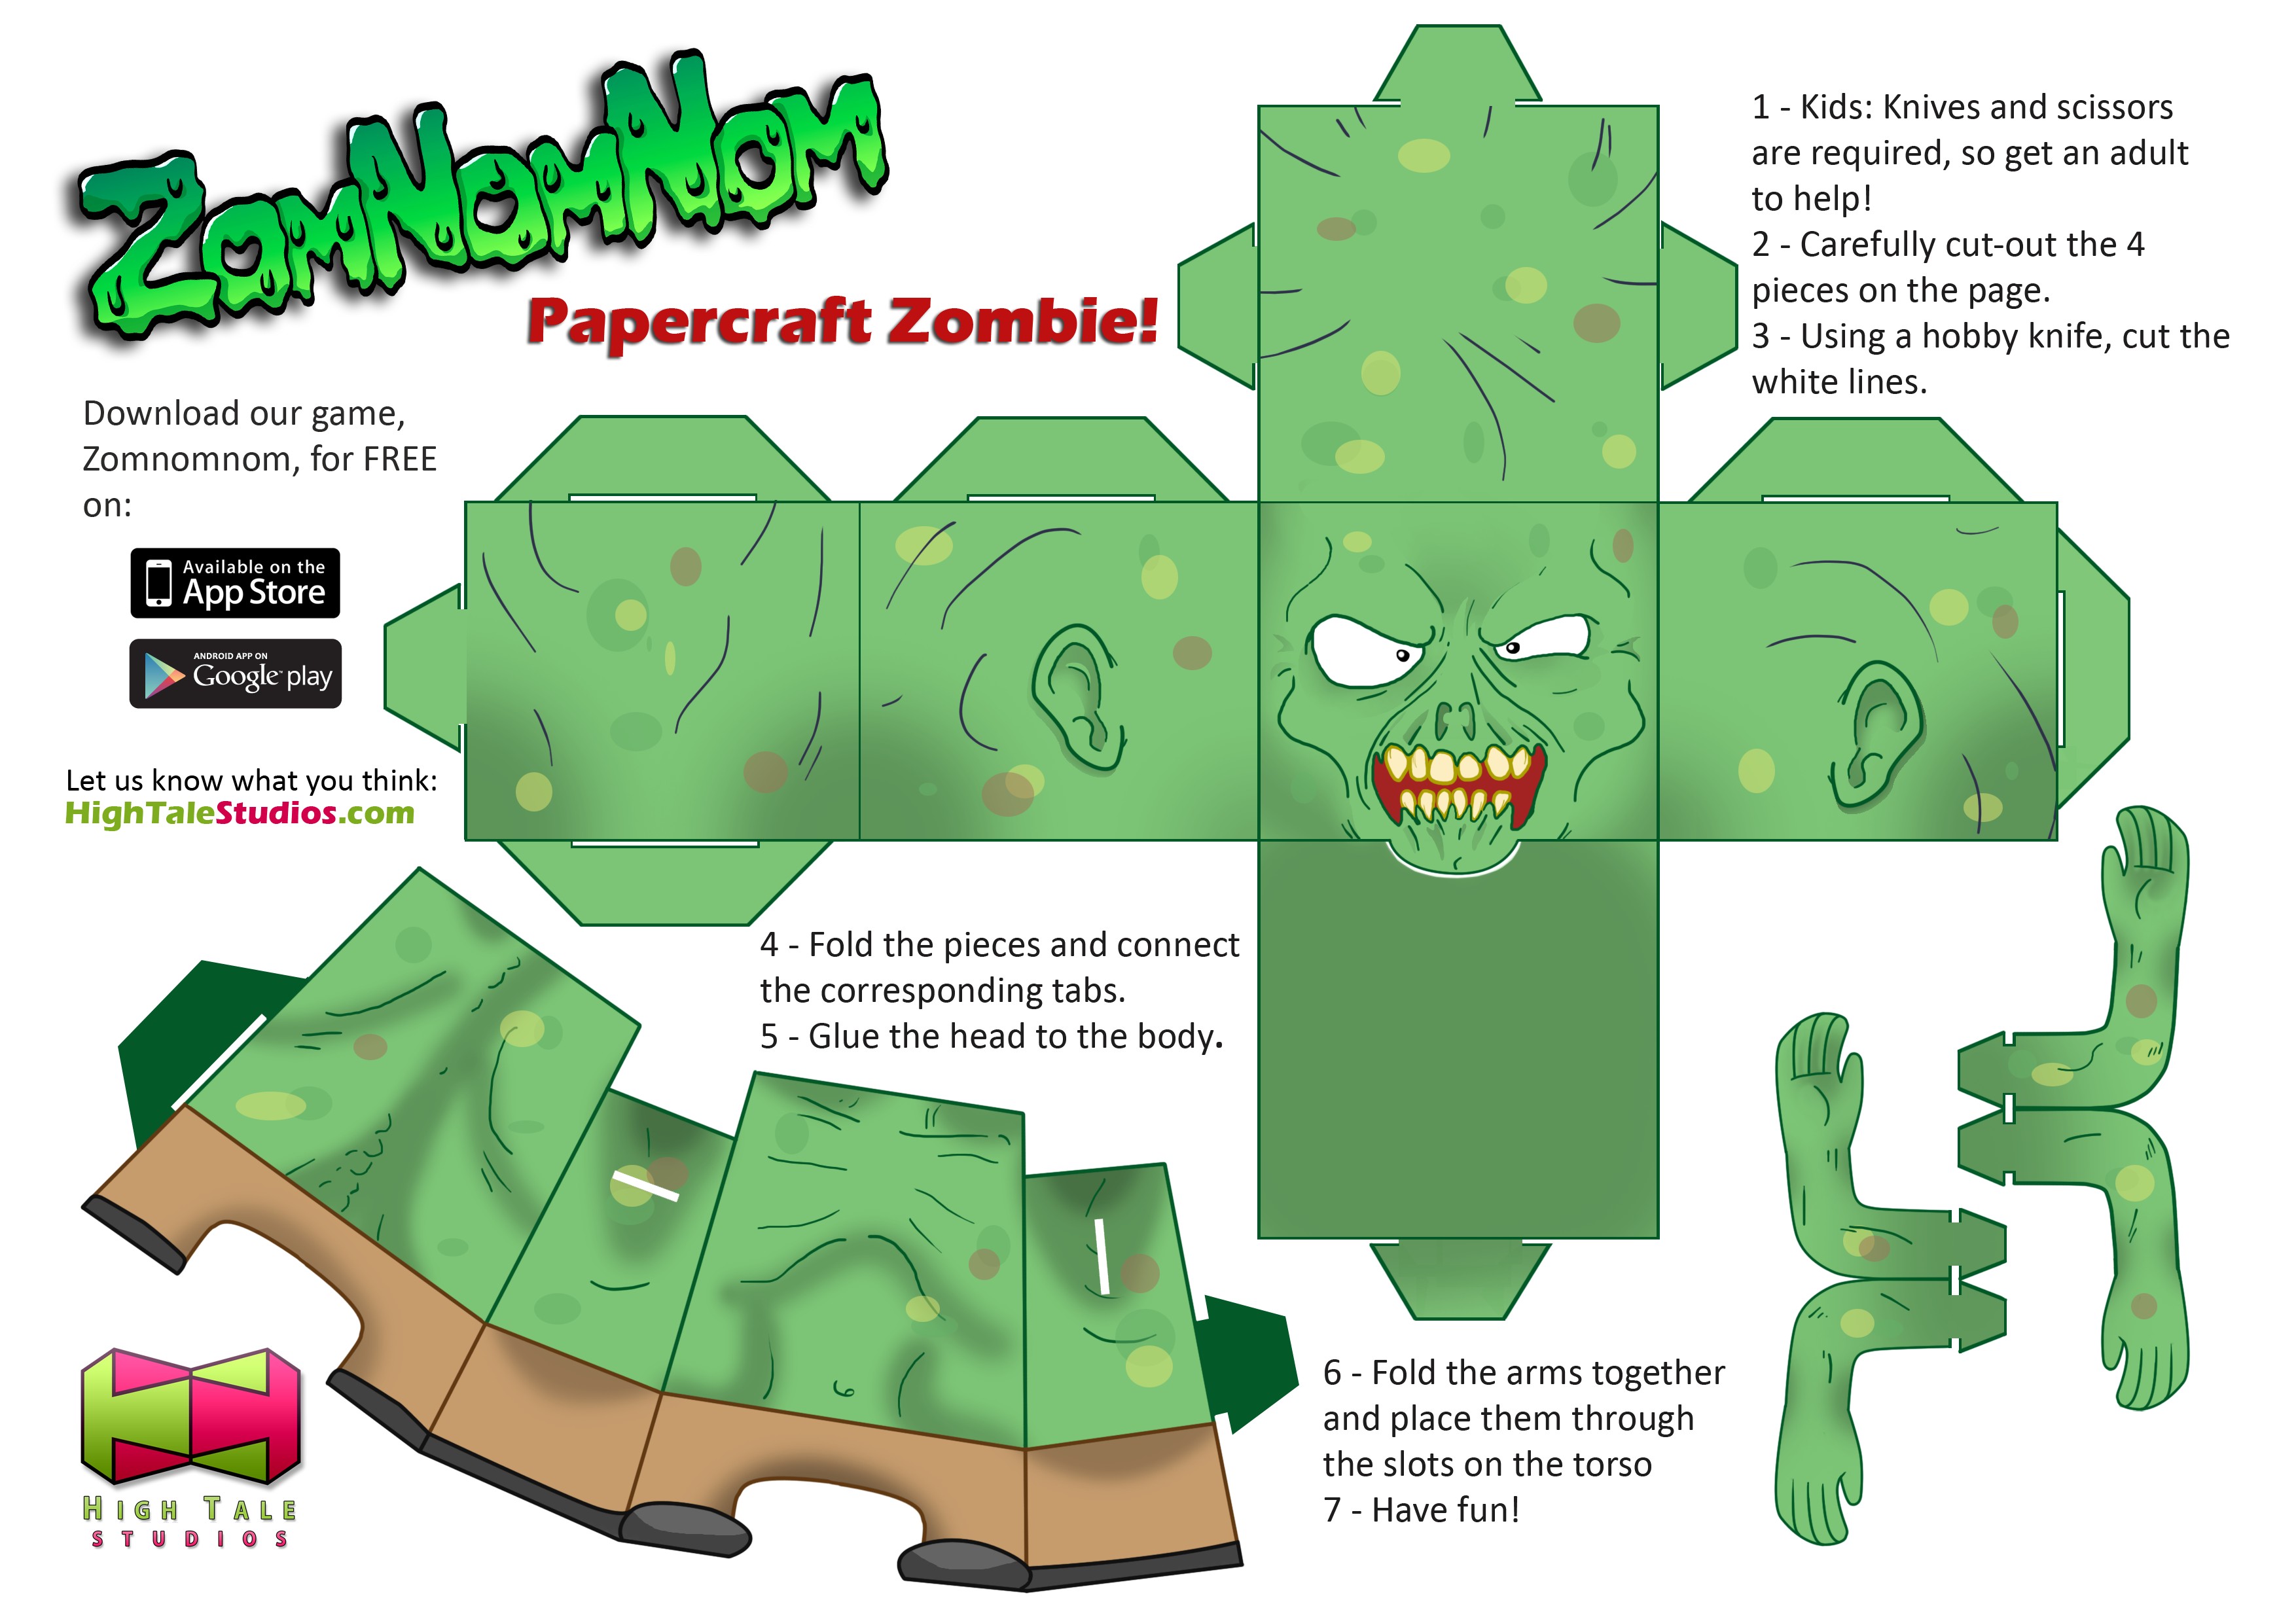 Zombie Papercraft Model] Papercraft Zombie We Created as A Promo for Our In Game